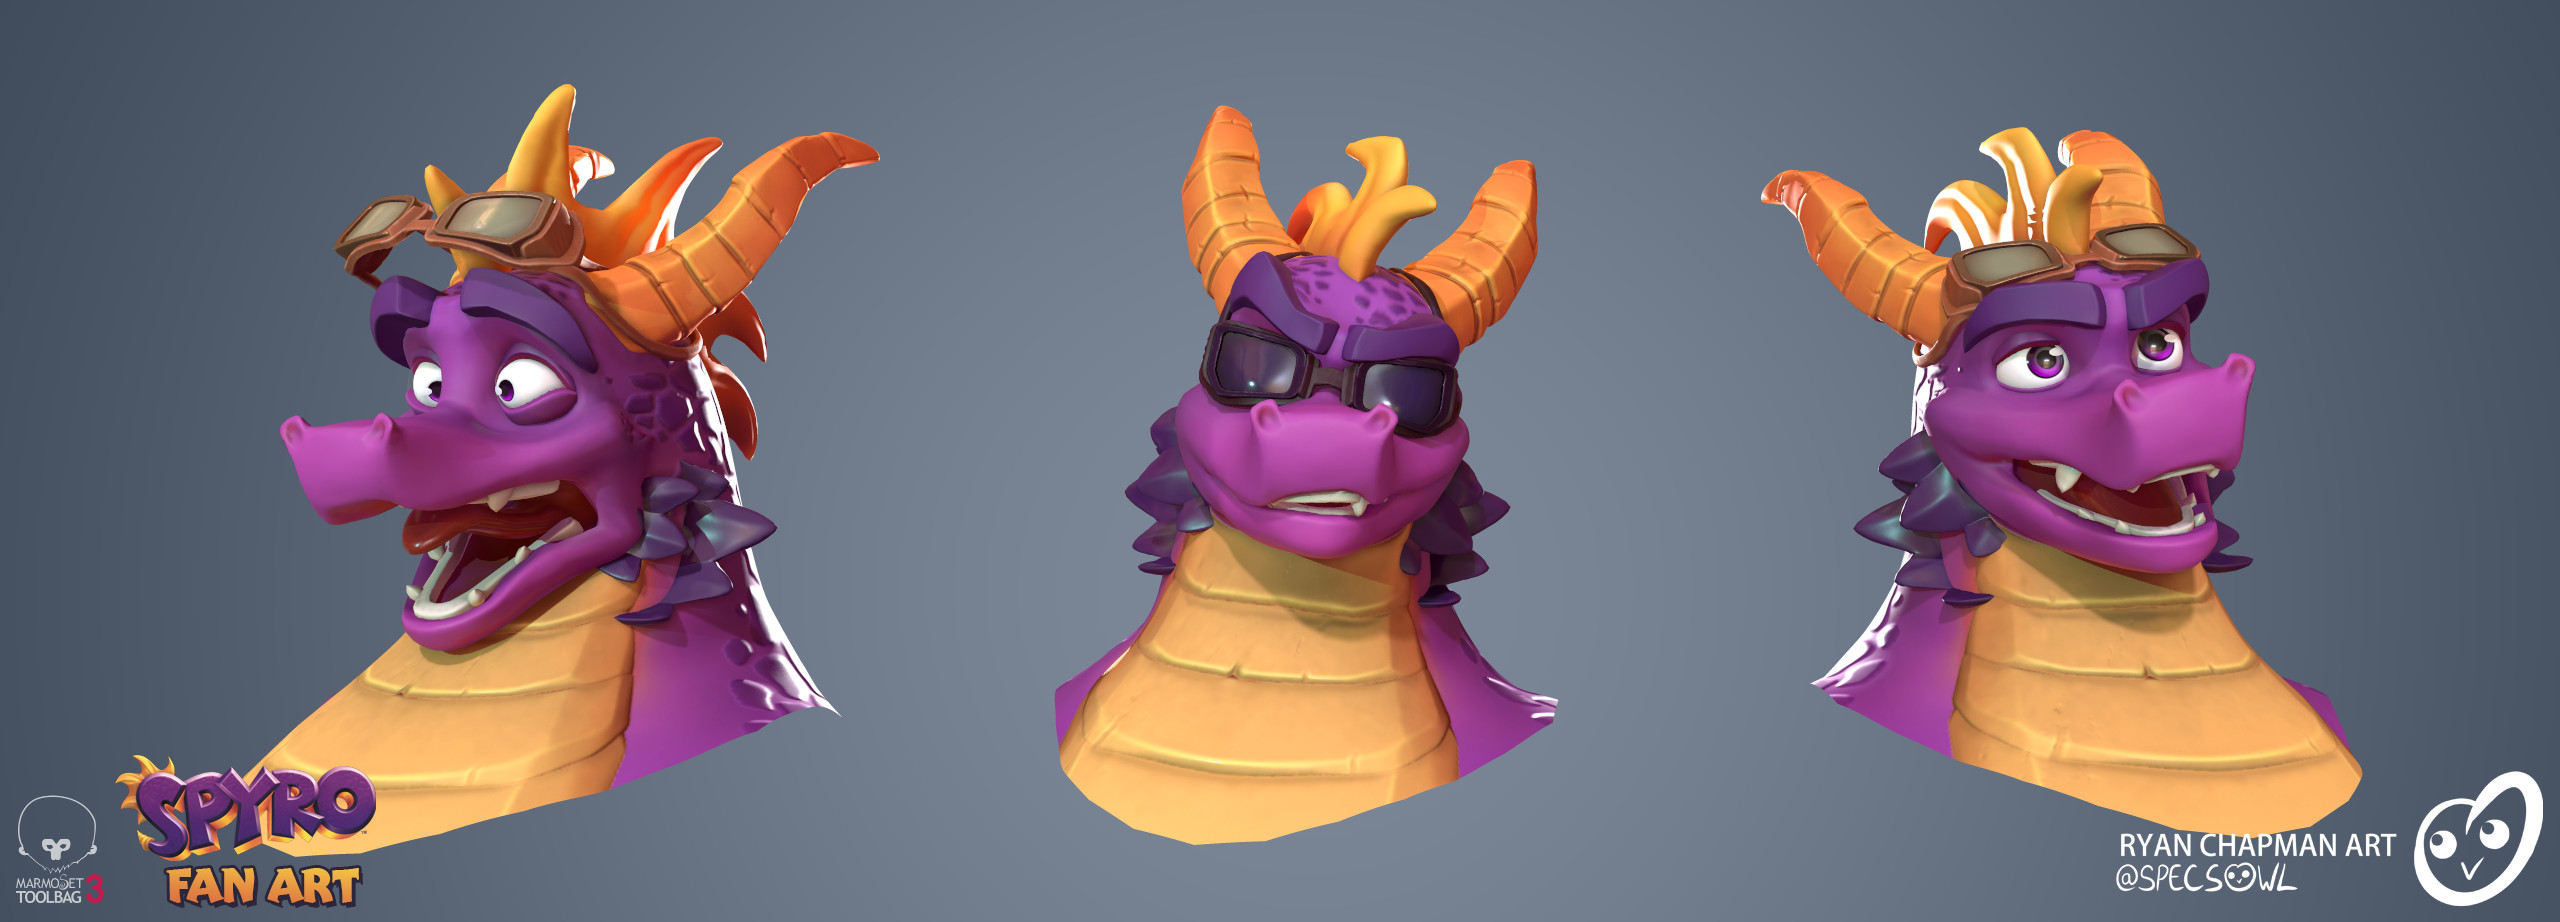 Various faces, sourced from original concept art and Spyro Reignited